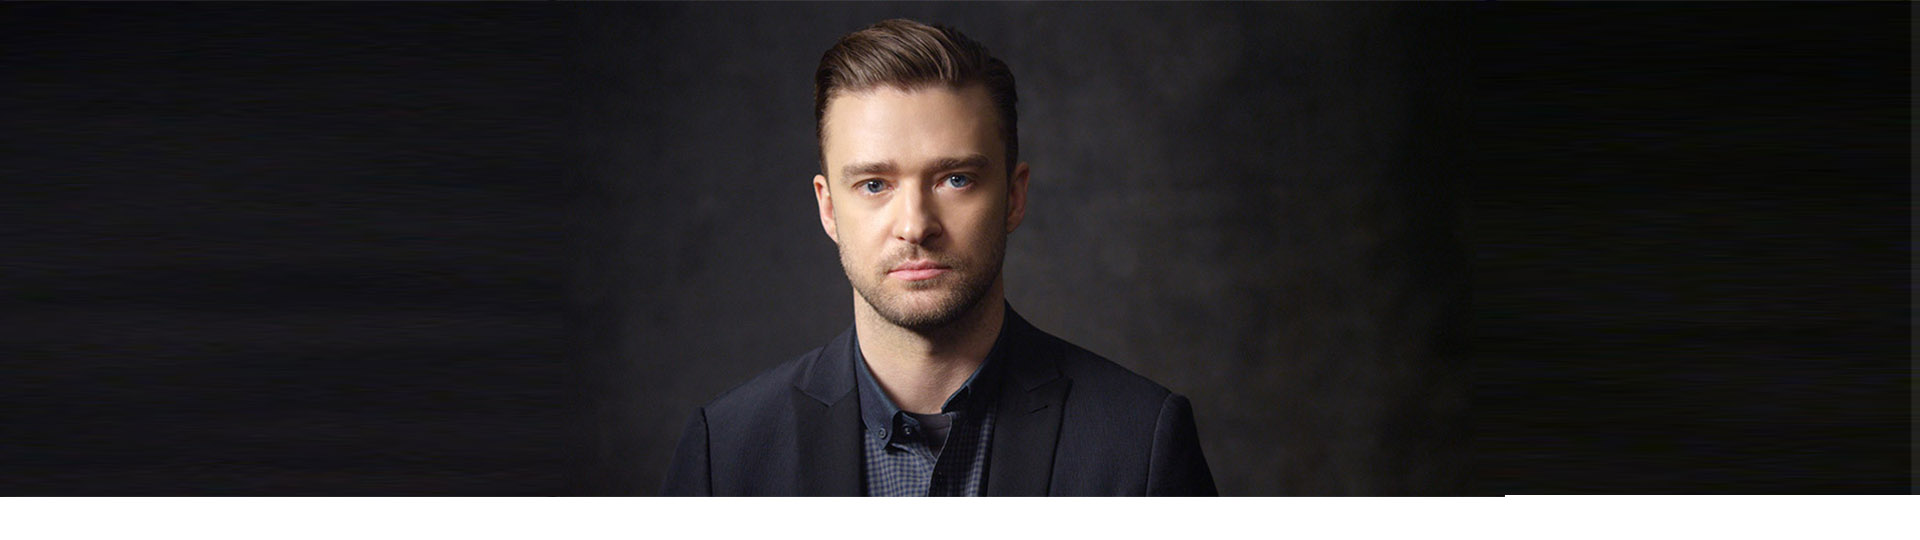 Justin Timberlake The Man Of The Woods 